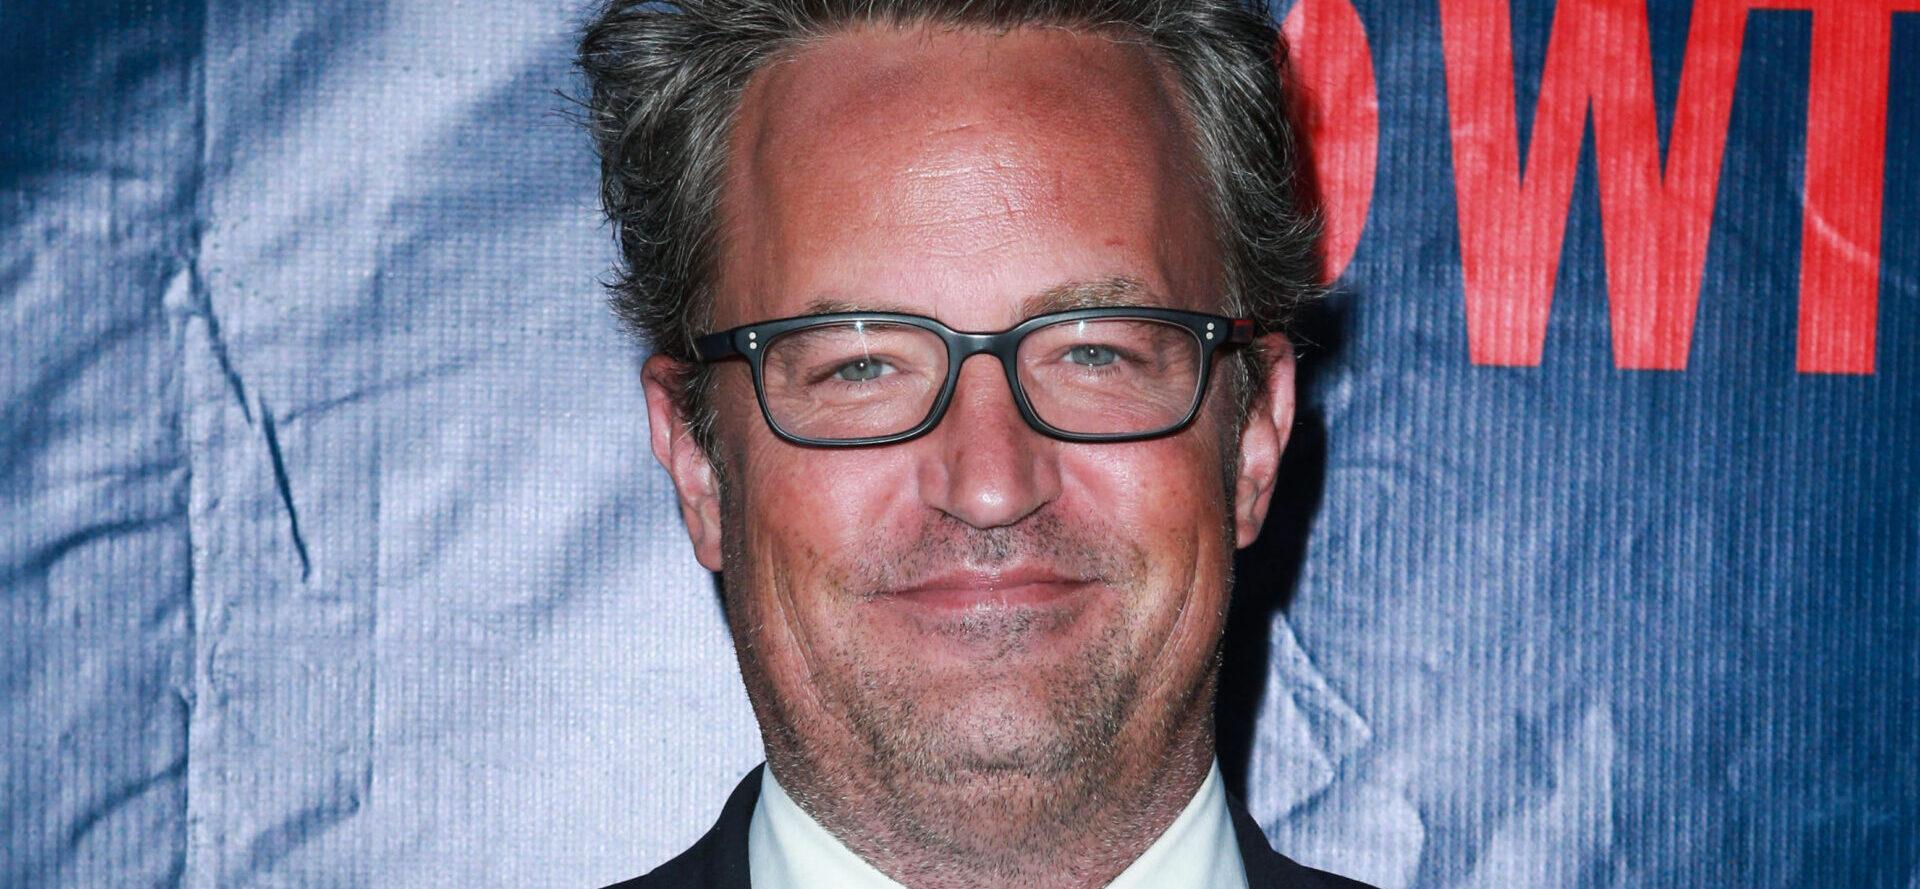 Matthew Perry’s Massive Fortune Will Most Likely Go To His Parents